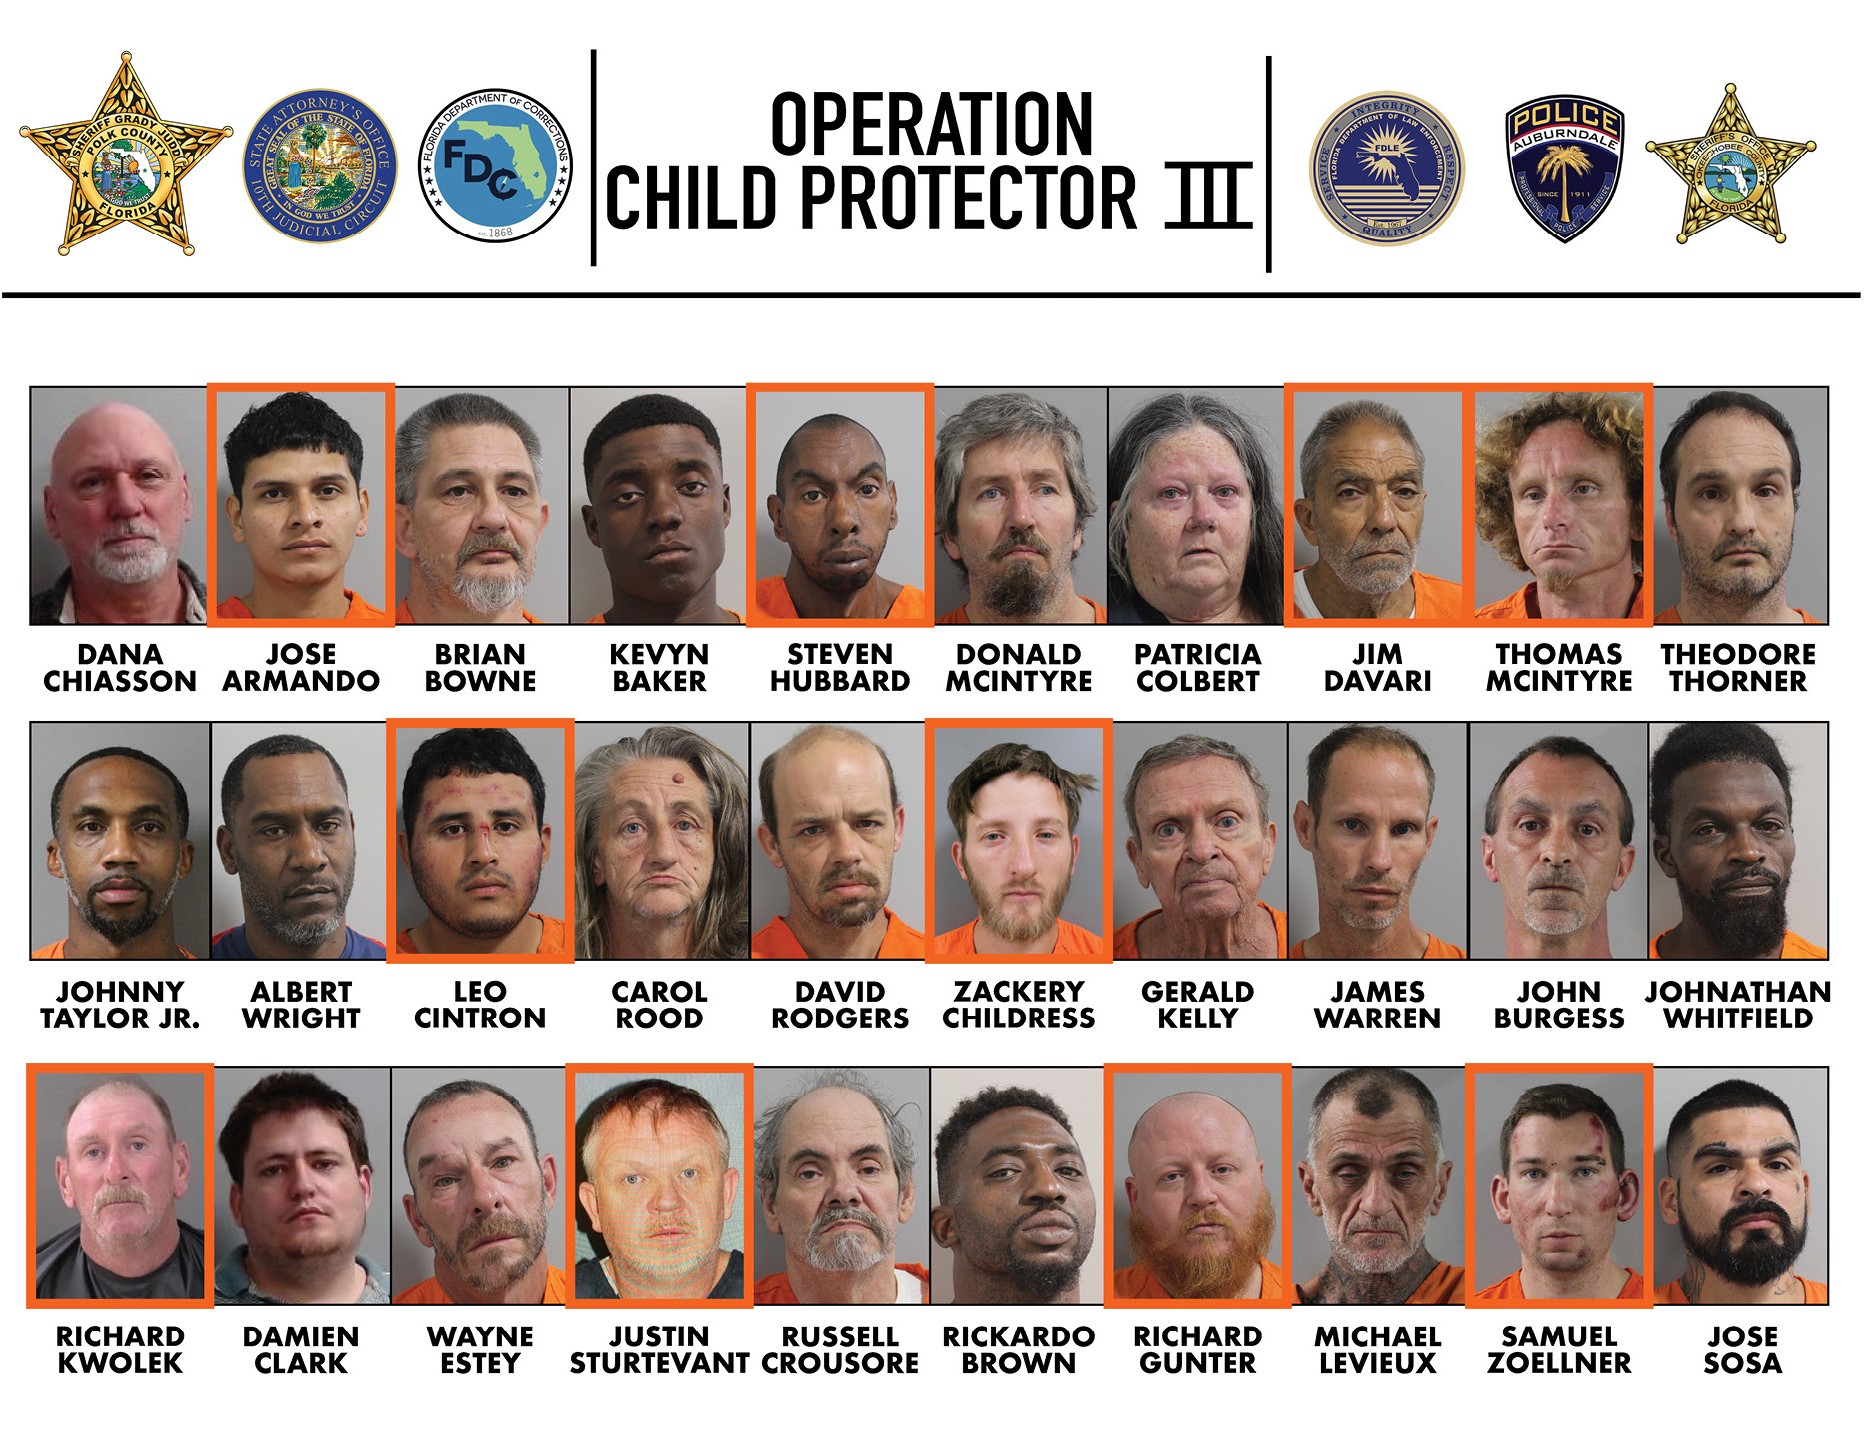 30 suspects arrested during investigation focused on protecting children from sexual offenders and predators pic